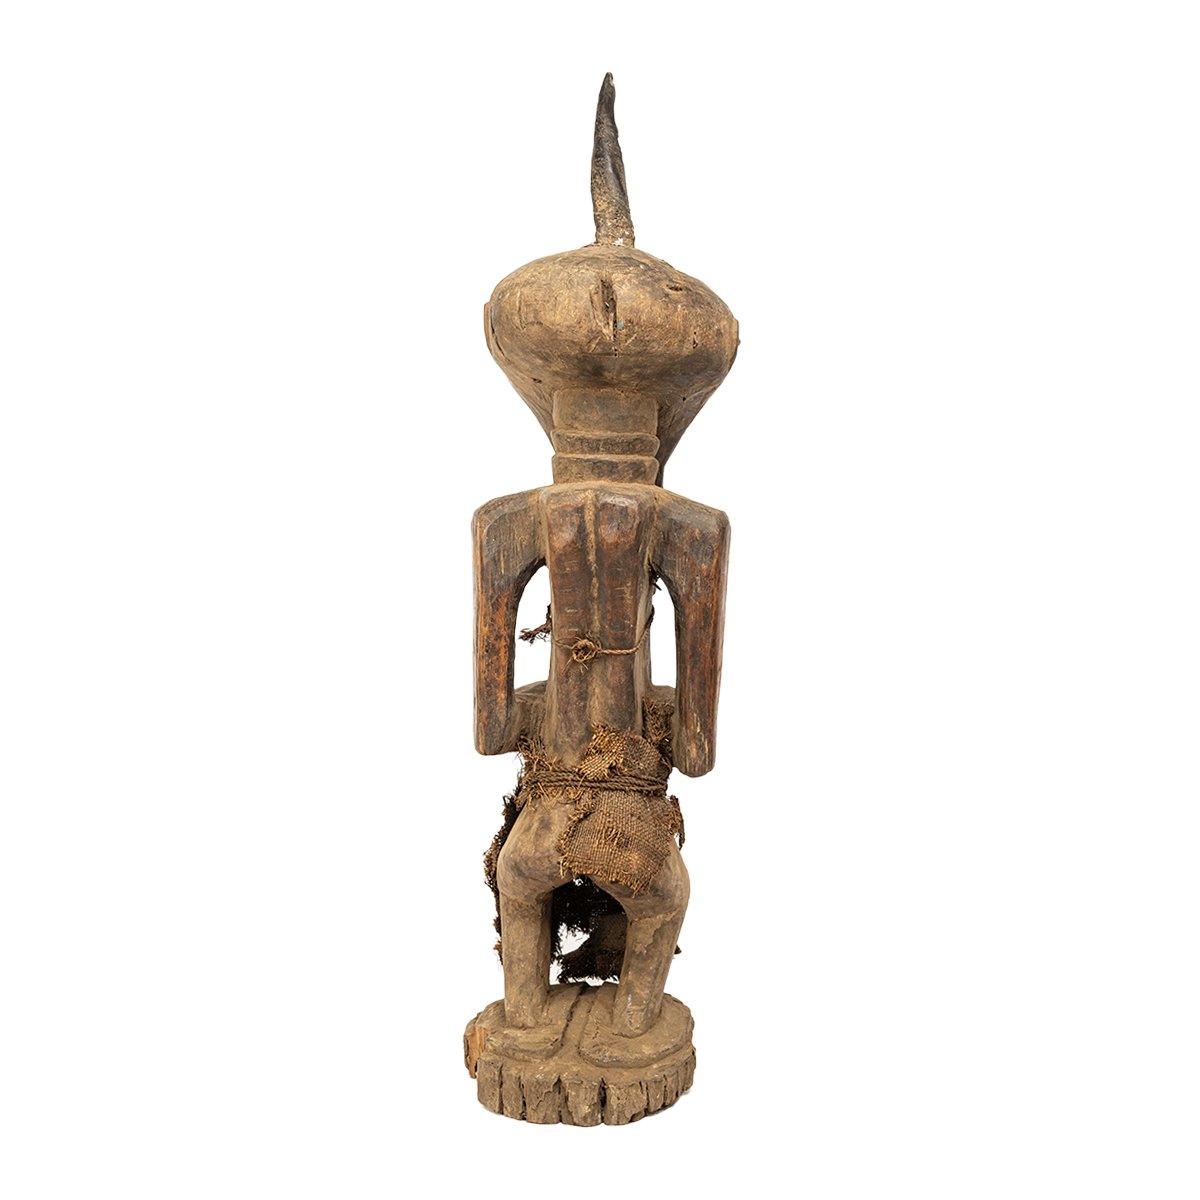 Songye idol - Authentic African handicrafts | Clothing, bags, painting, toys & more - CULTURE HUB by Muthoni Unchained